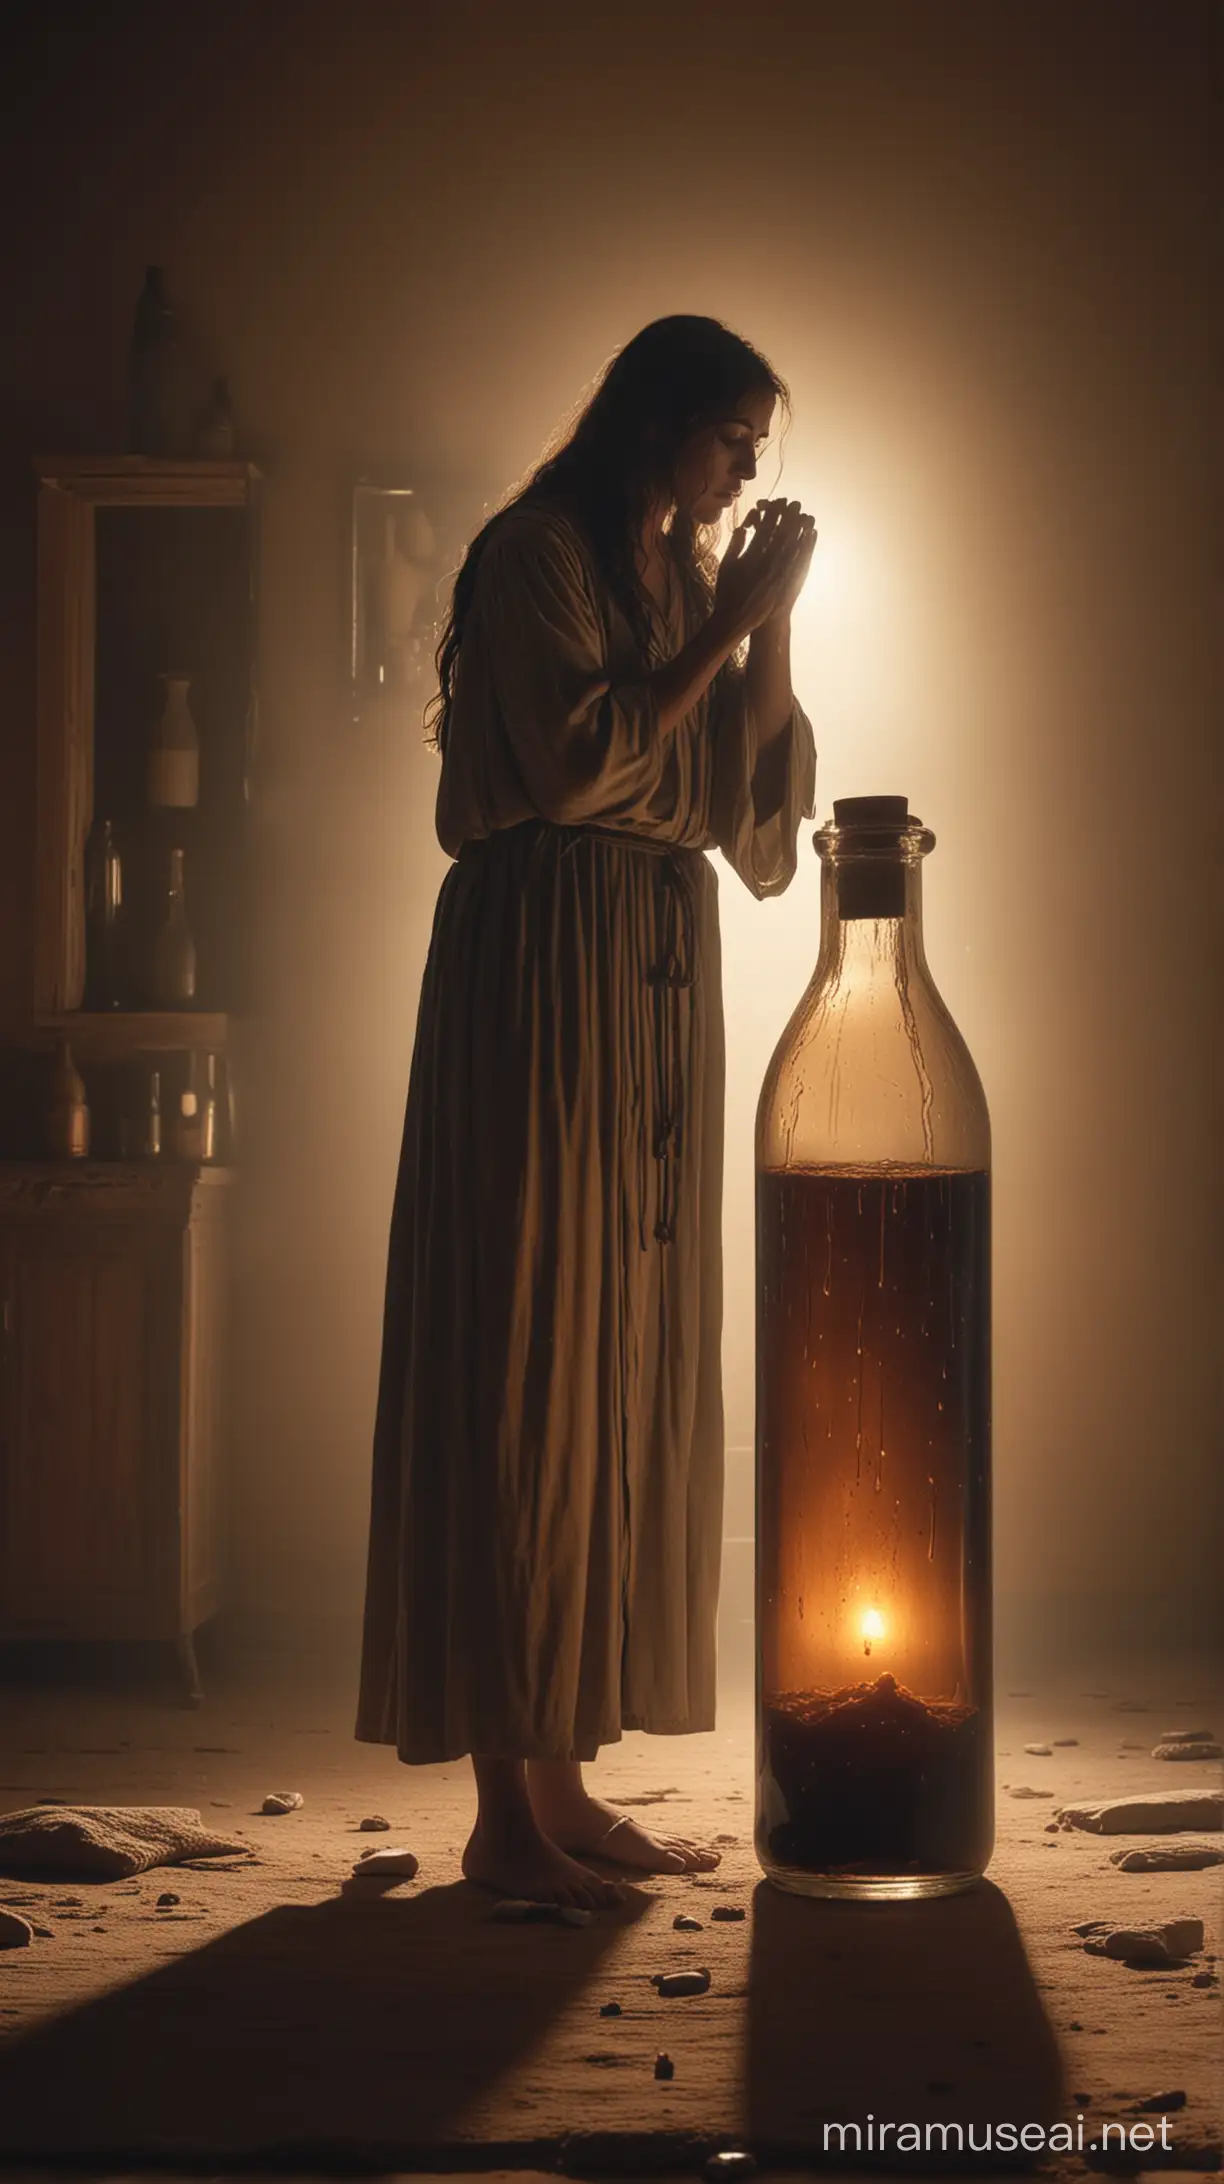 A person standing in a dimly lit room, tears streaming down their face, with a soft glow illuminating a bottle filled with tears, representing God's collection of sorrows in ancient world  